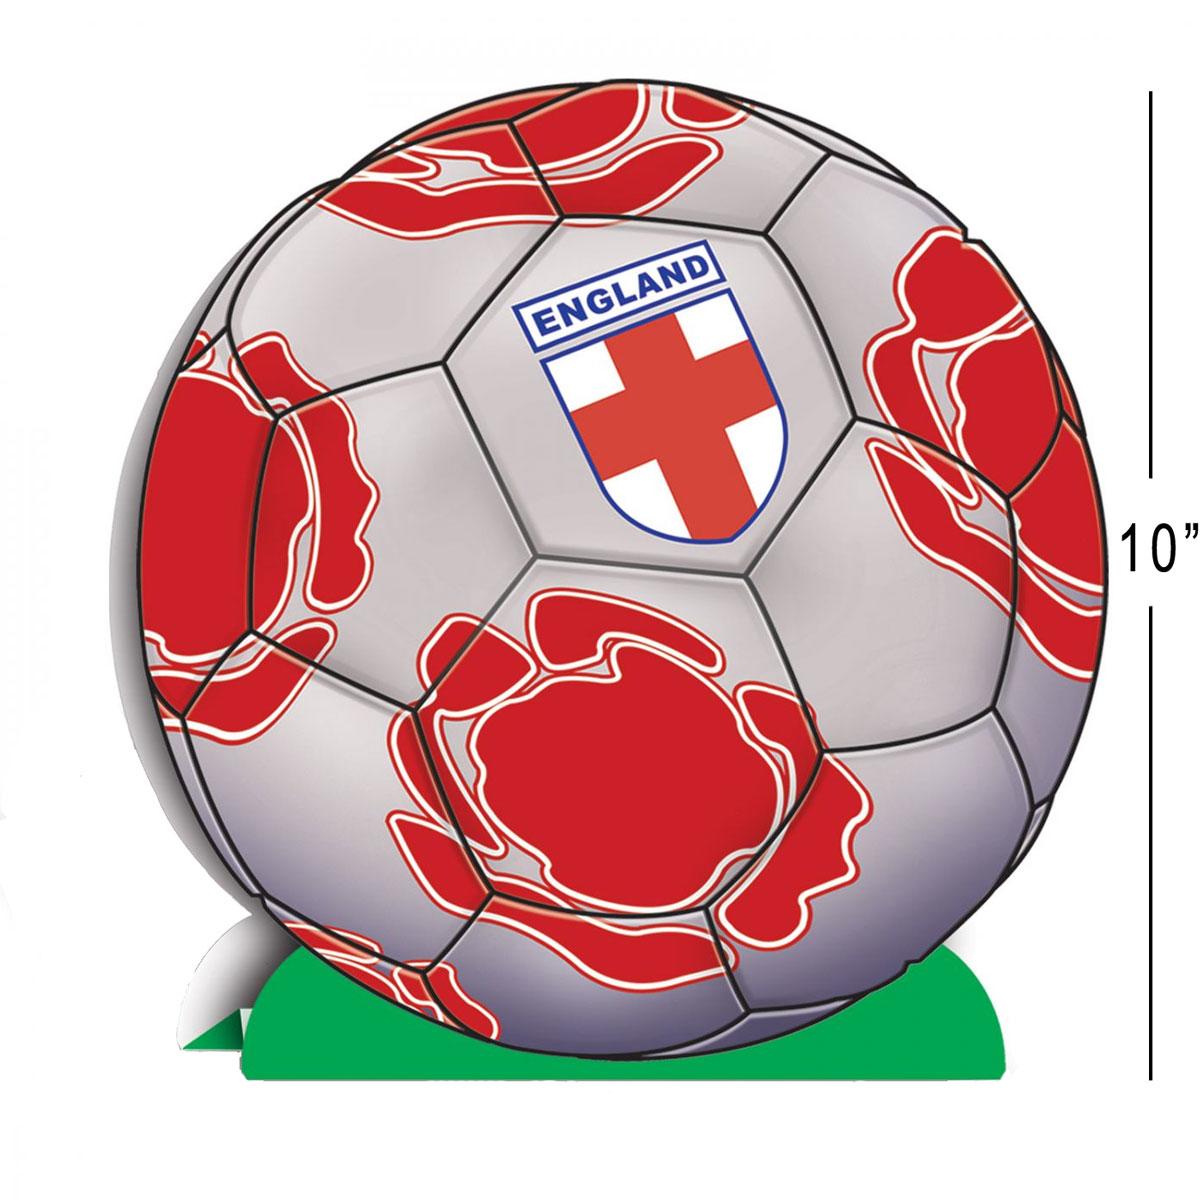 England Football Themed Centrepiece Tablecentre 10" tall by Beistle 54481 available here at Karnival Costumes online party shop